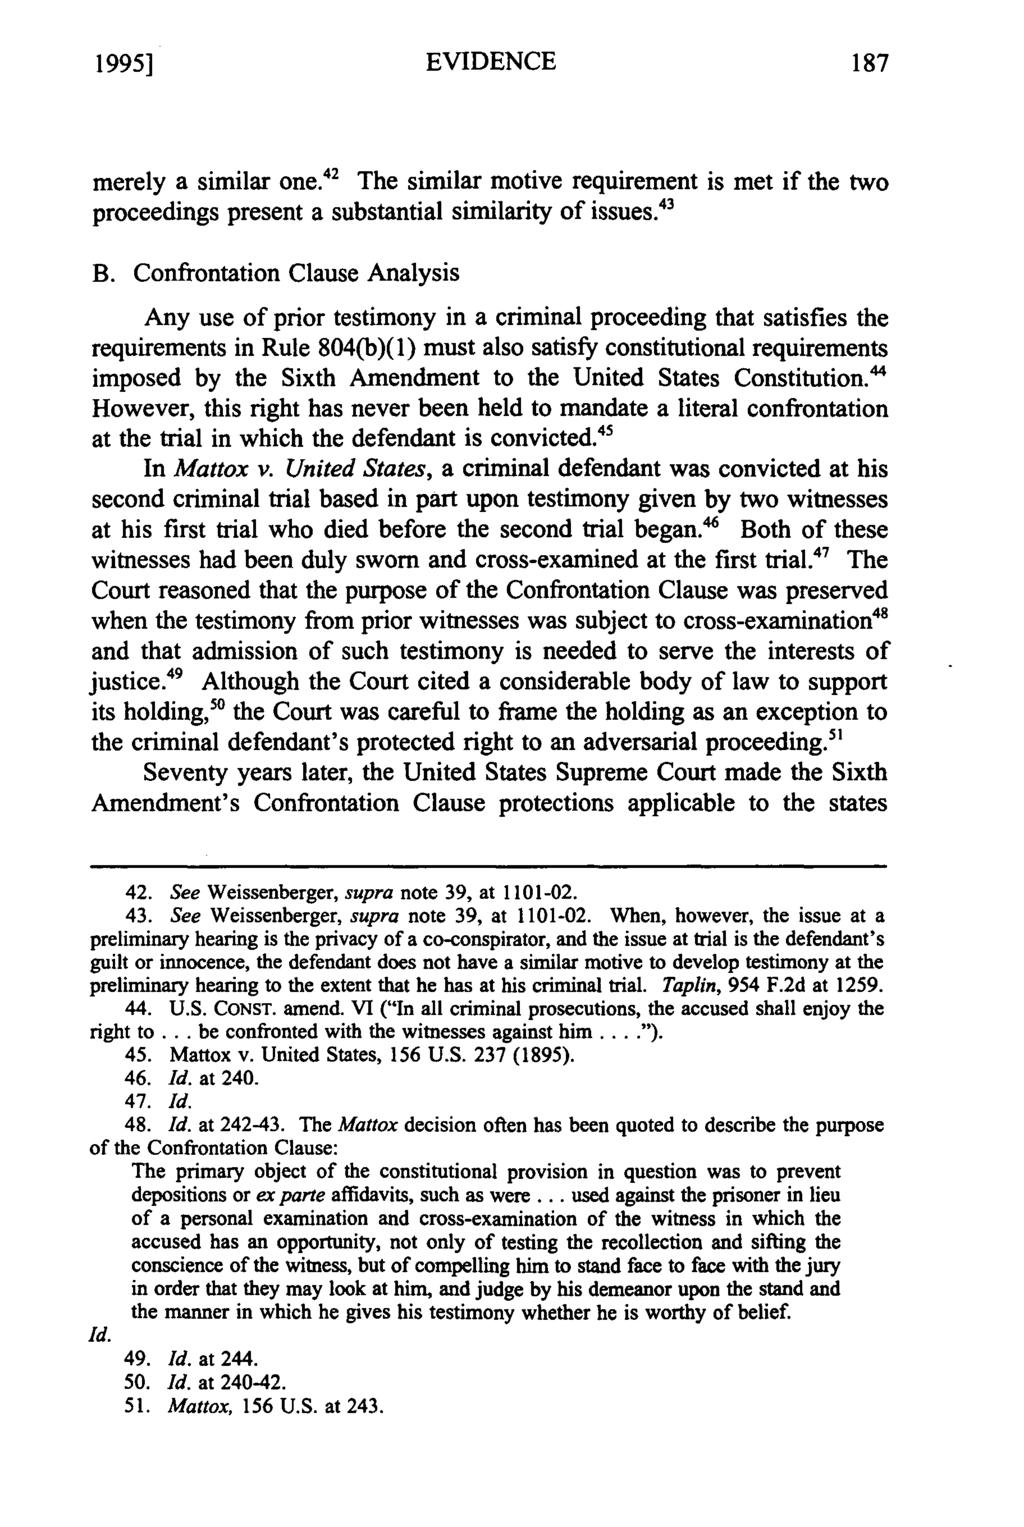 19951 EVIDENCE merely a similar one. 42 The similar motive requirement is met if the two proceedings present a substantial similarity of issues. 43 B.